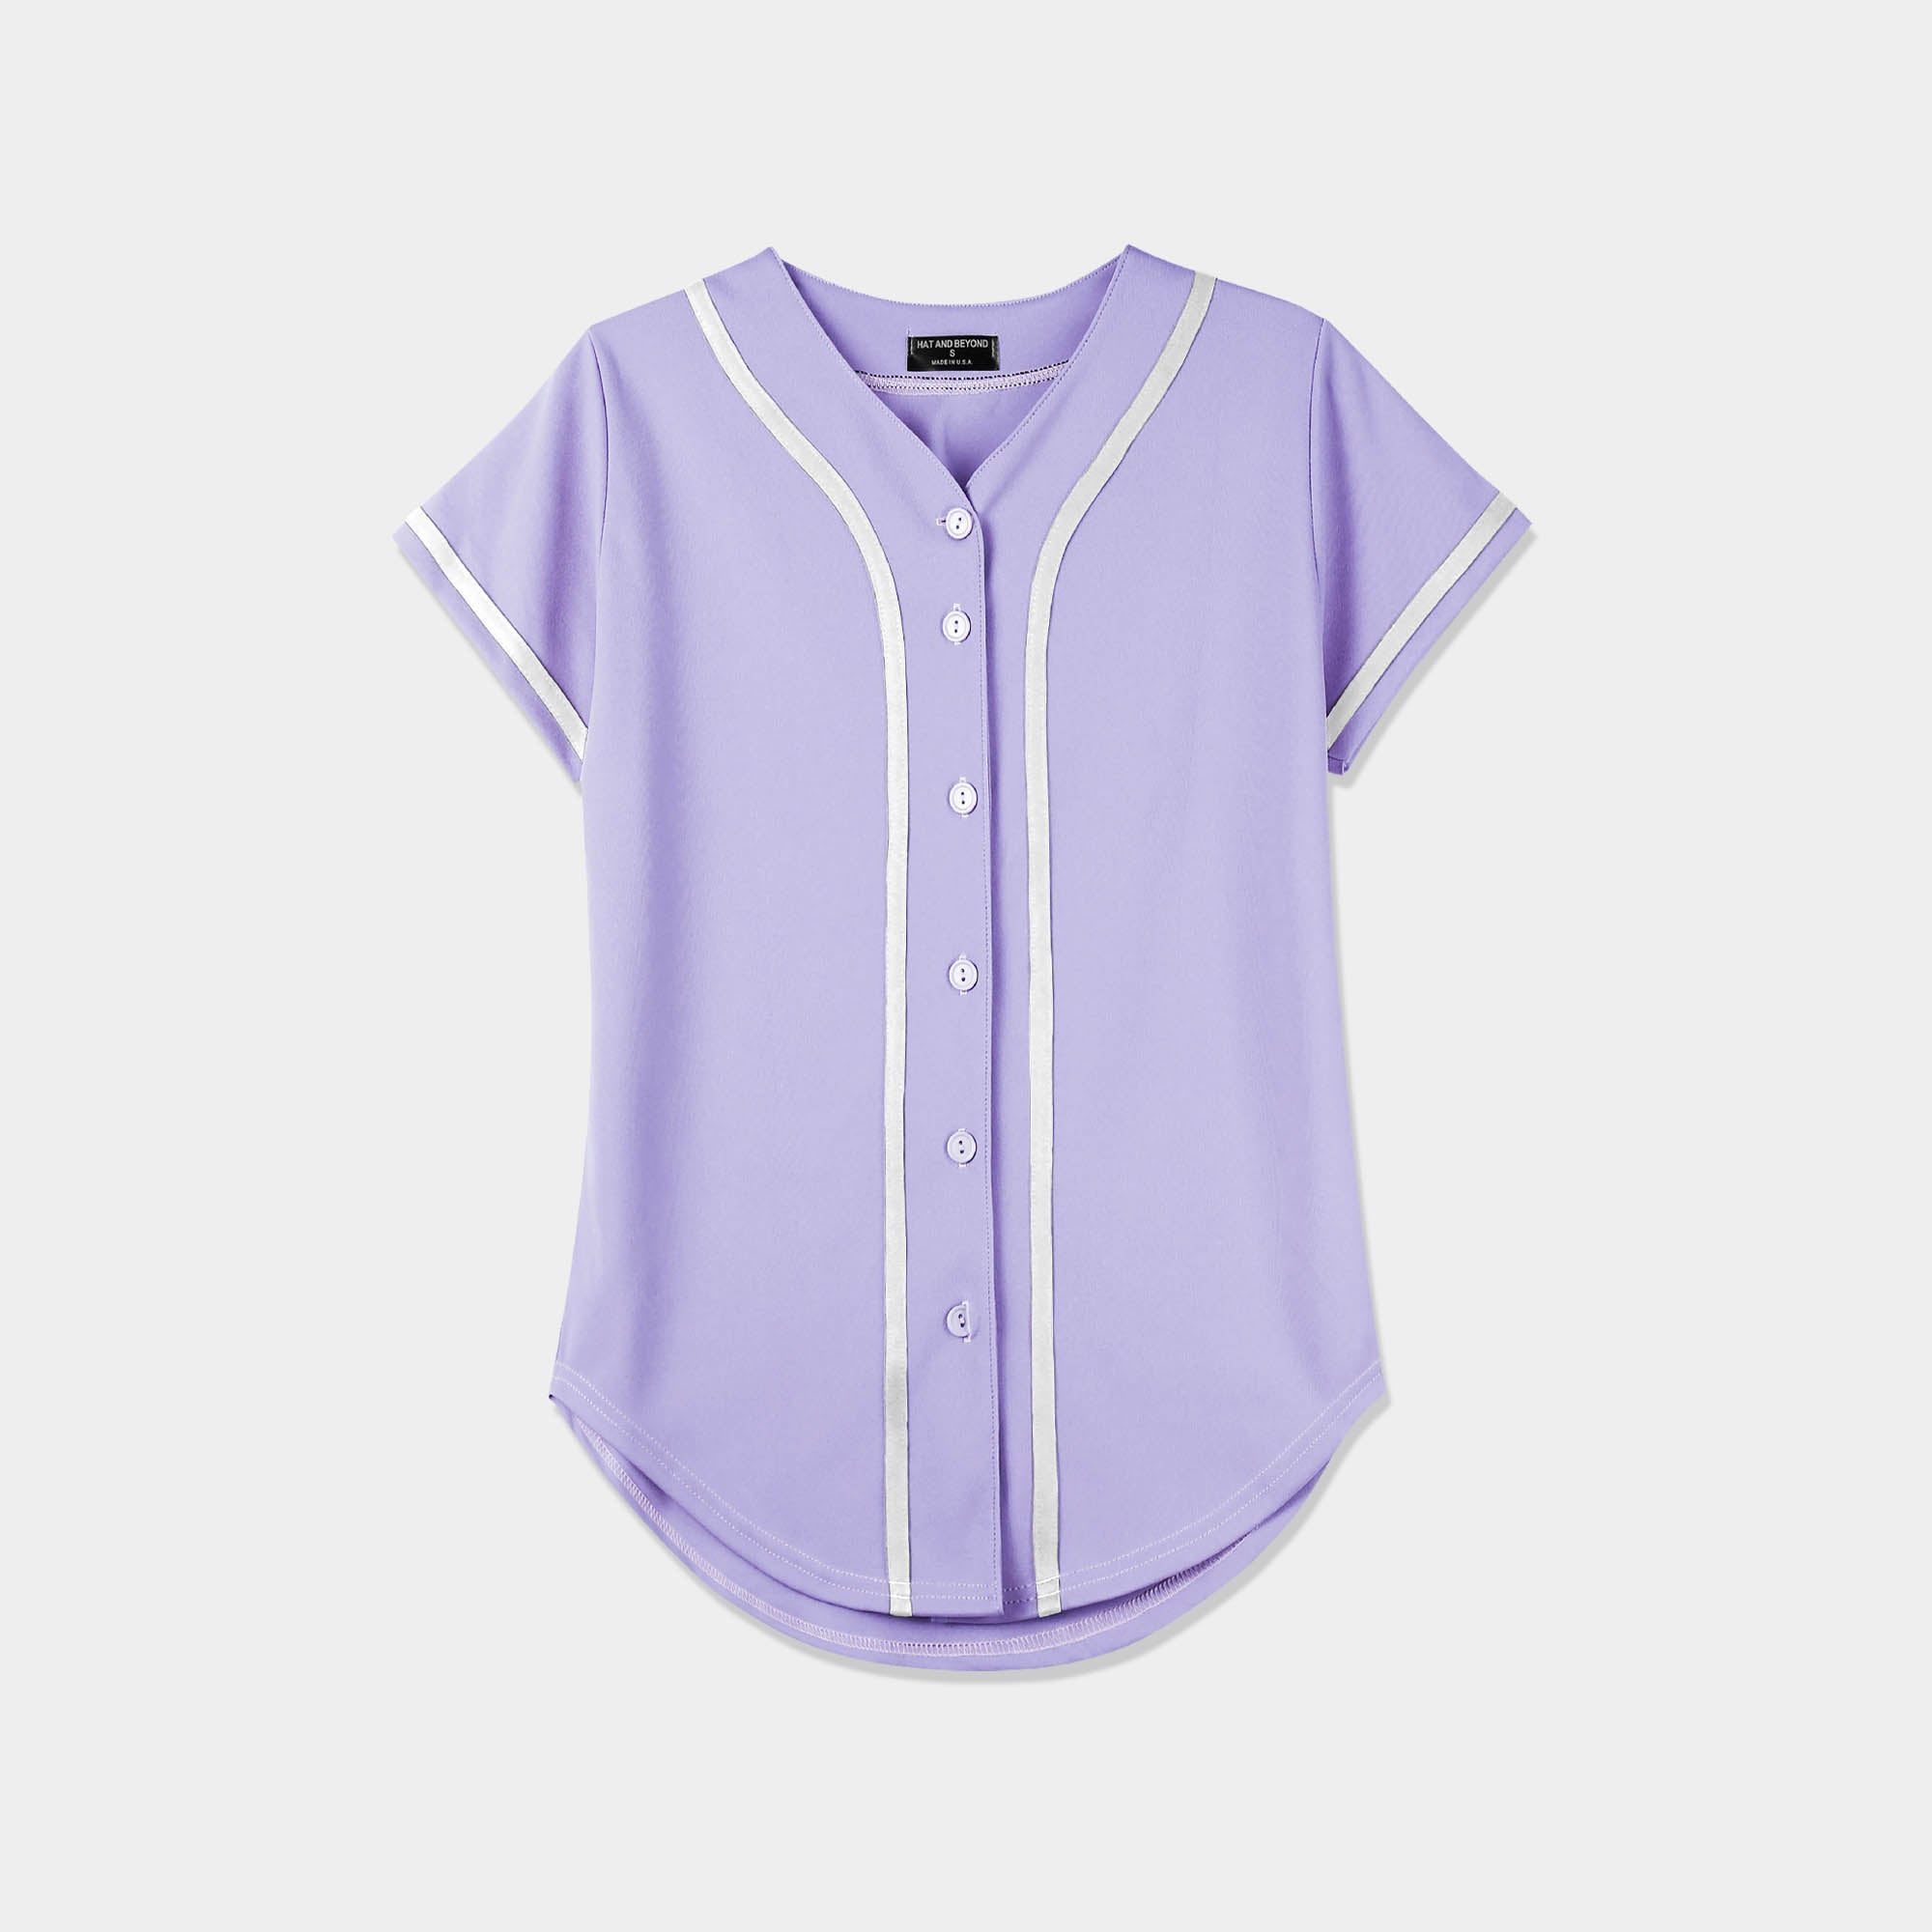 Tops, 3 For 15 Los Rockies Purple Baseball Button Down Jersey